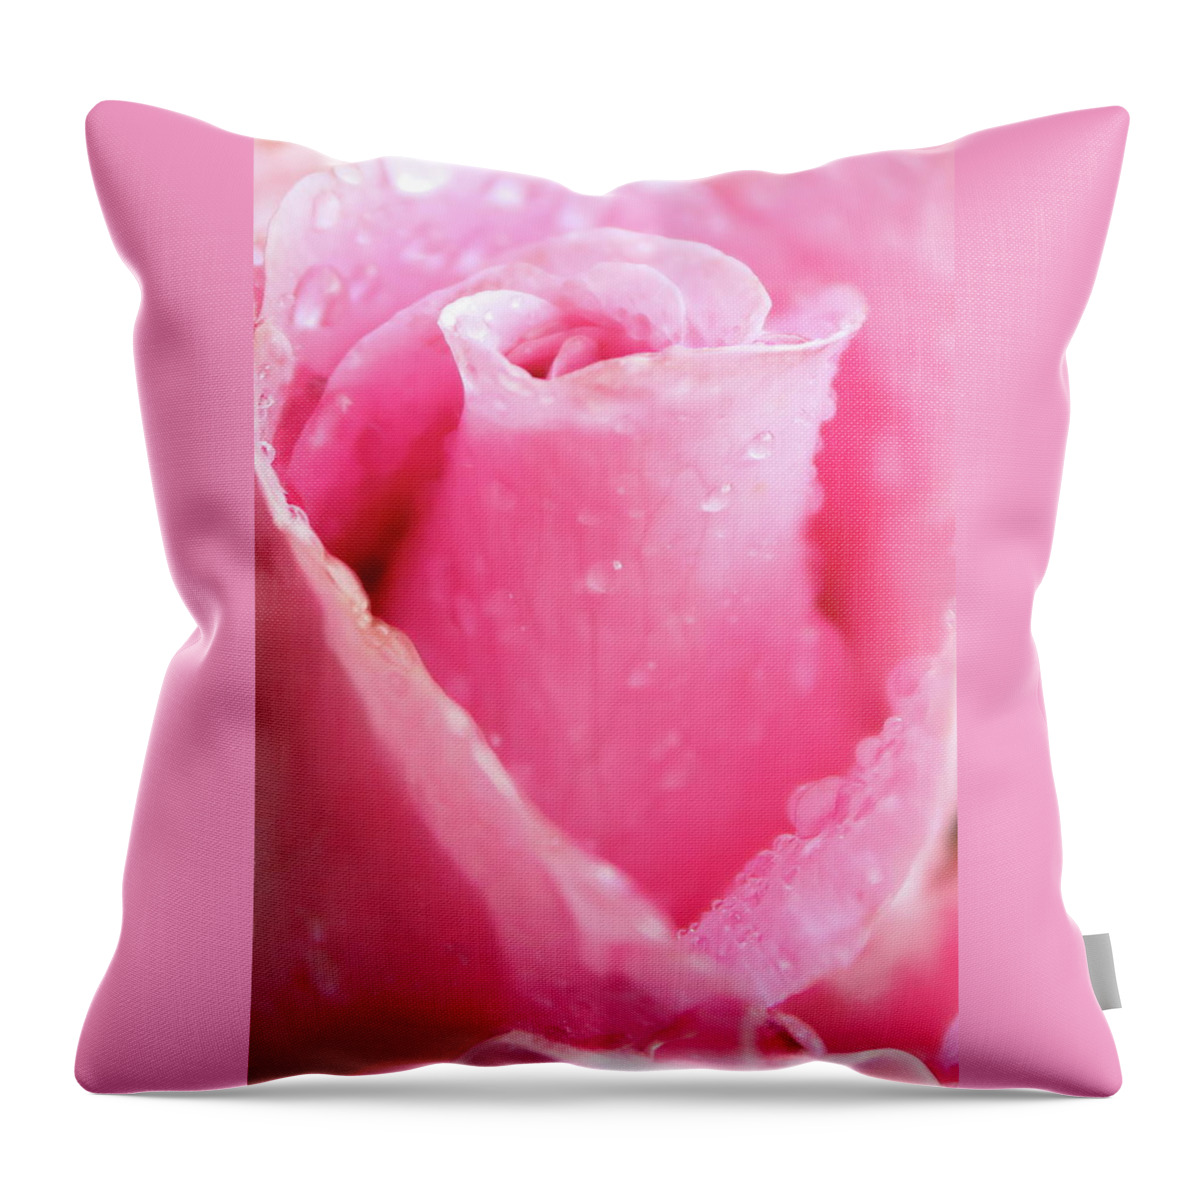 Rose Throw Pillow featuring the photograph A Rose Is A Rose by Lens Art Photography By Larry Trager